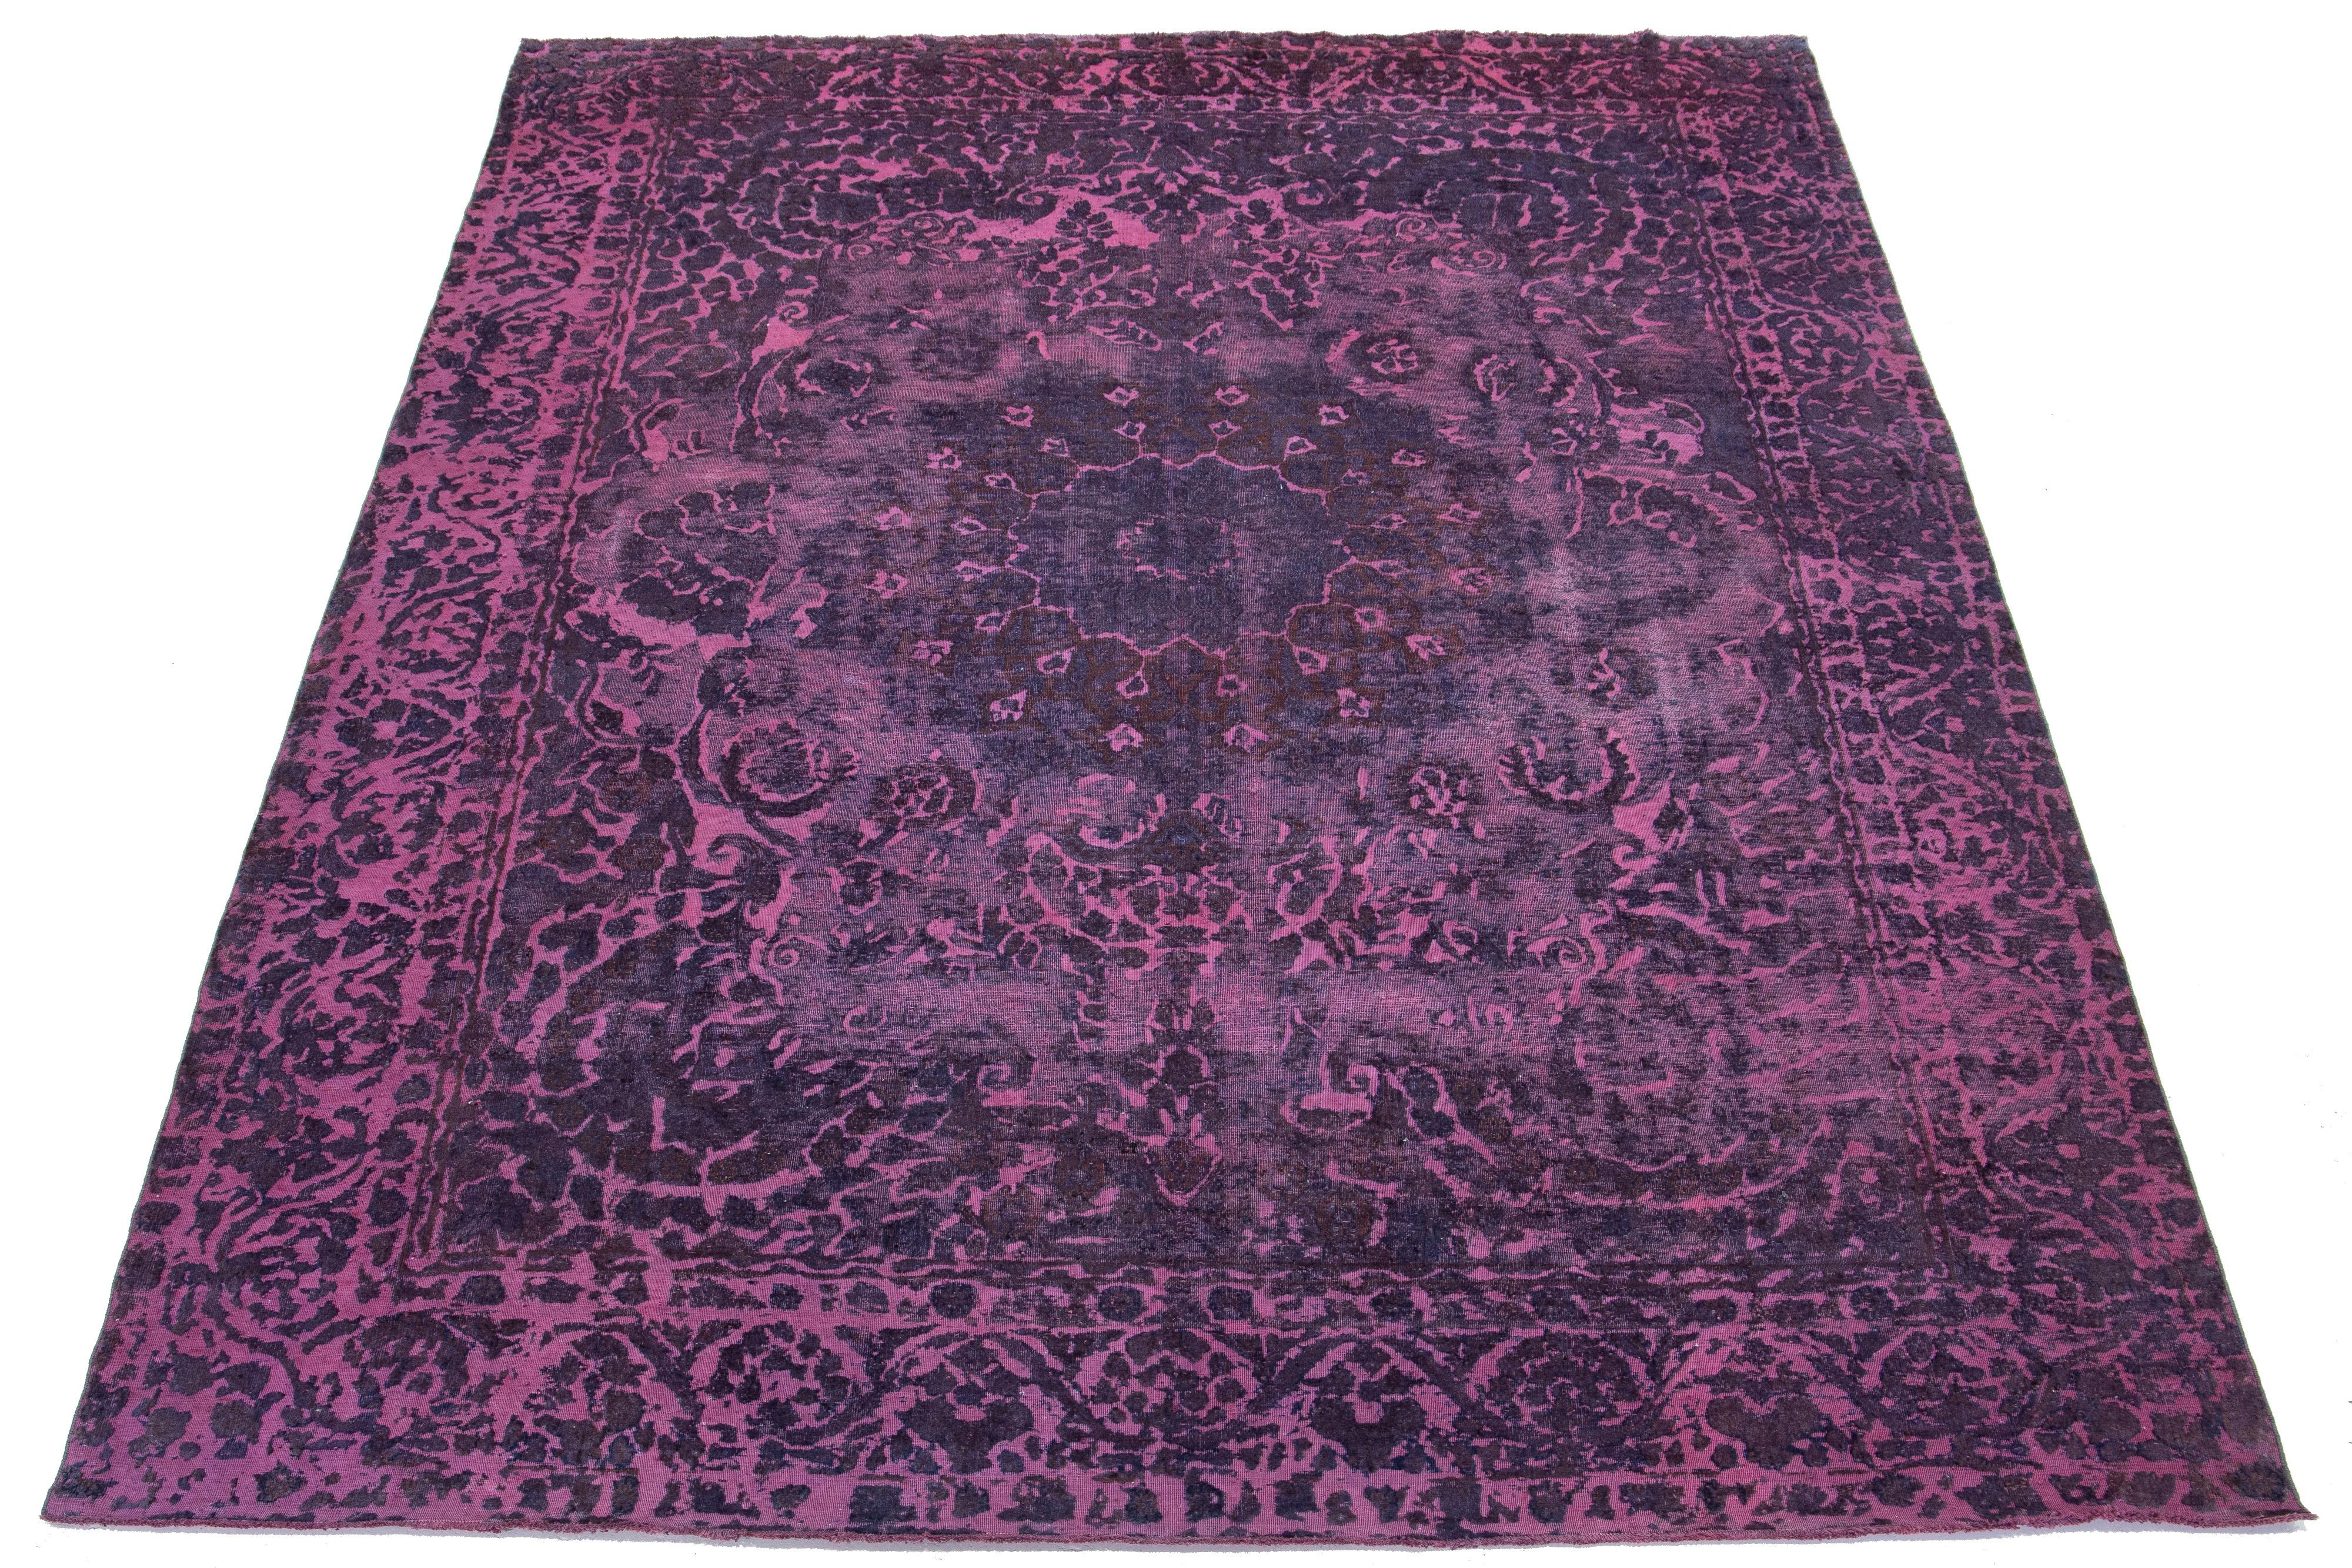 This antique purple Persian wool rug showcases a beautiful rosette design with blue and brown accents.

This rug measures 9'3'' x 13'1